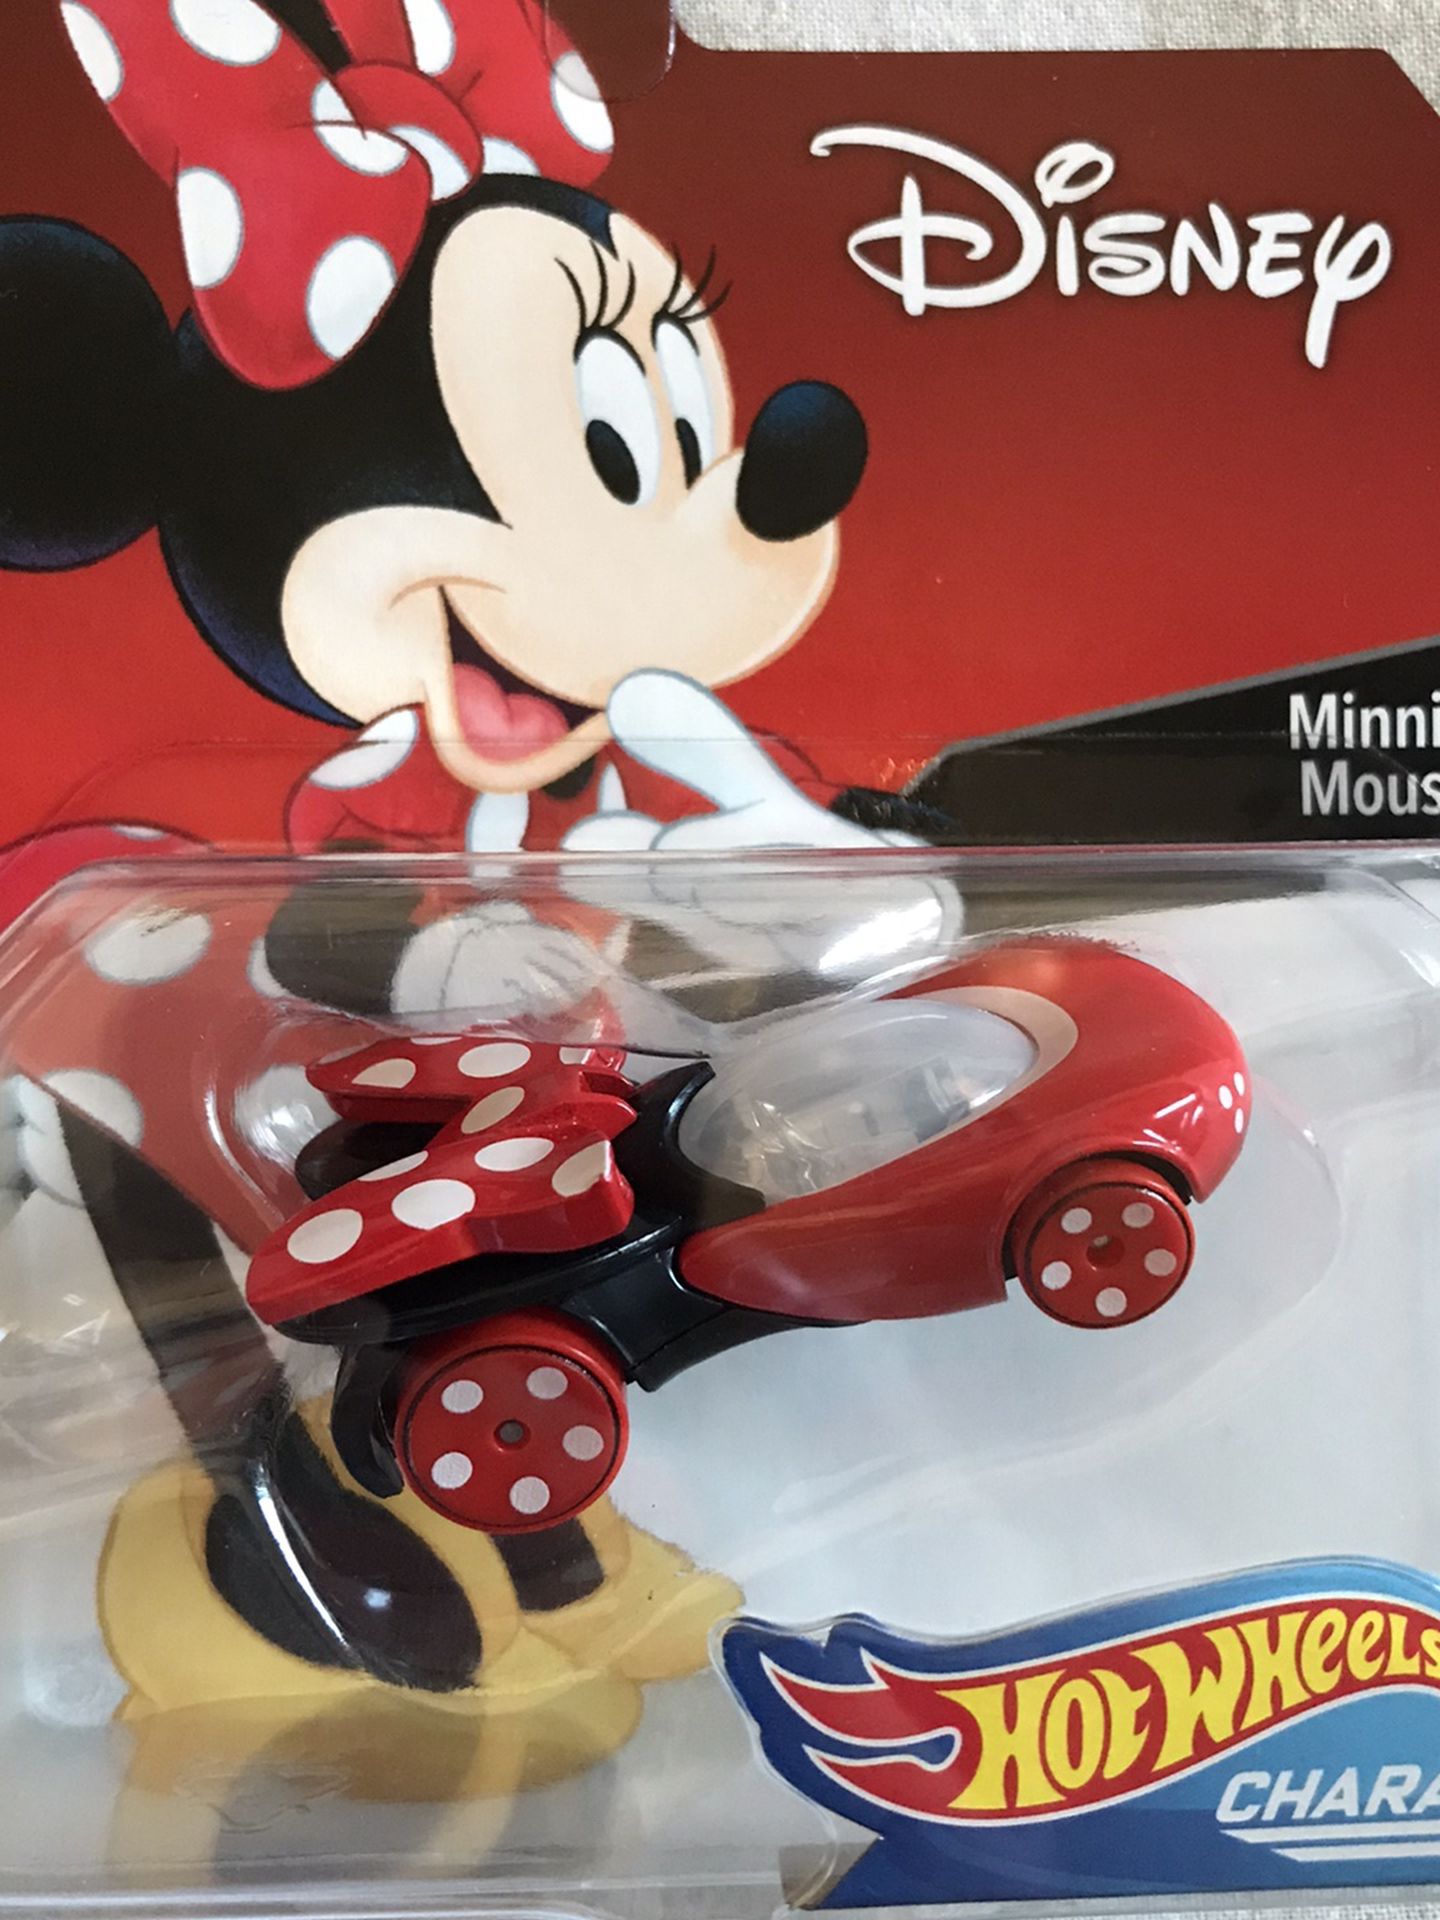 Disney, Minnie Mouse - Hot Wheels Character Car